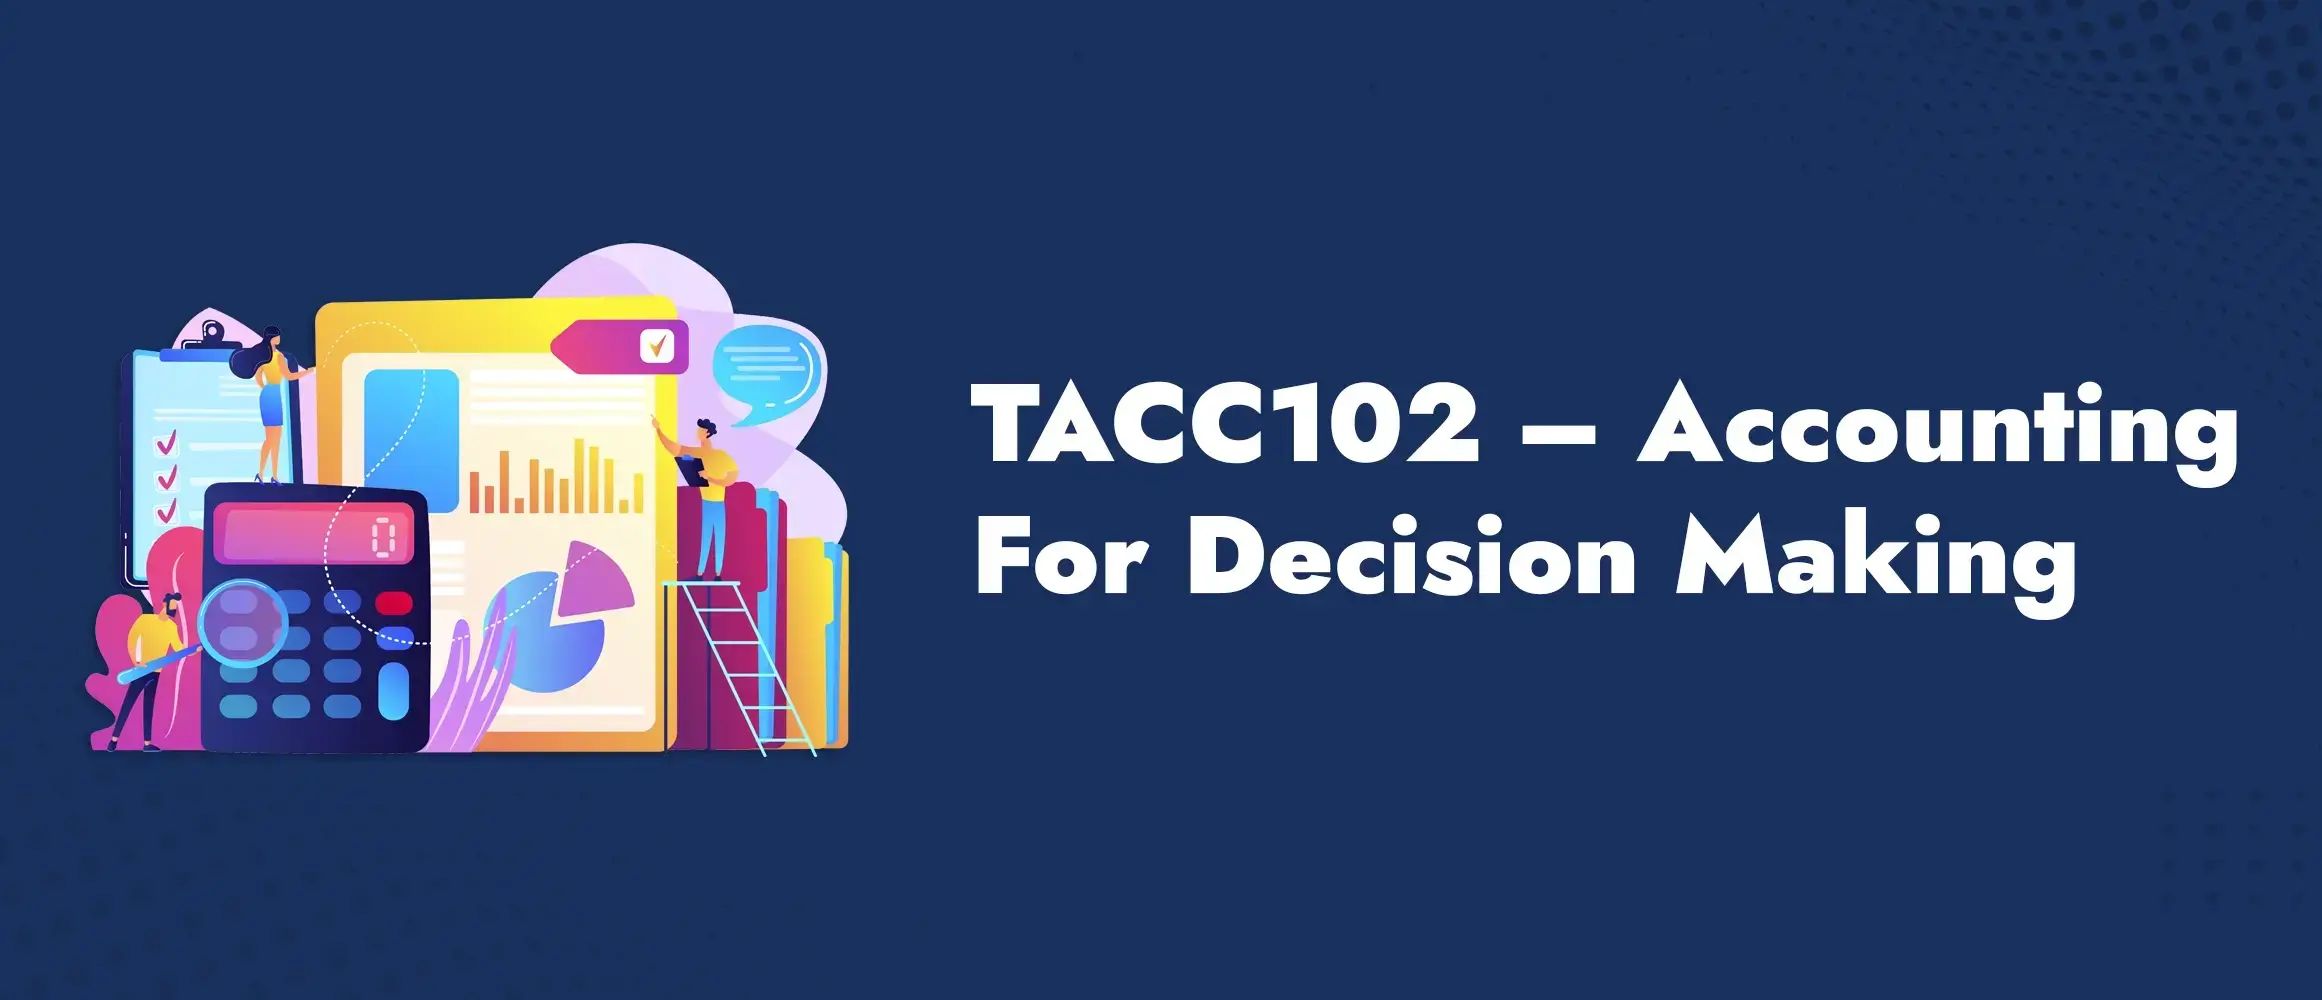 TACC102 Accounting For Decision Making